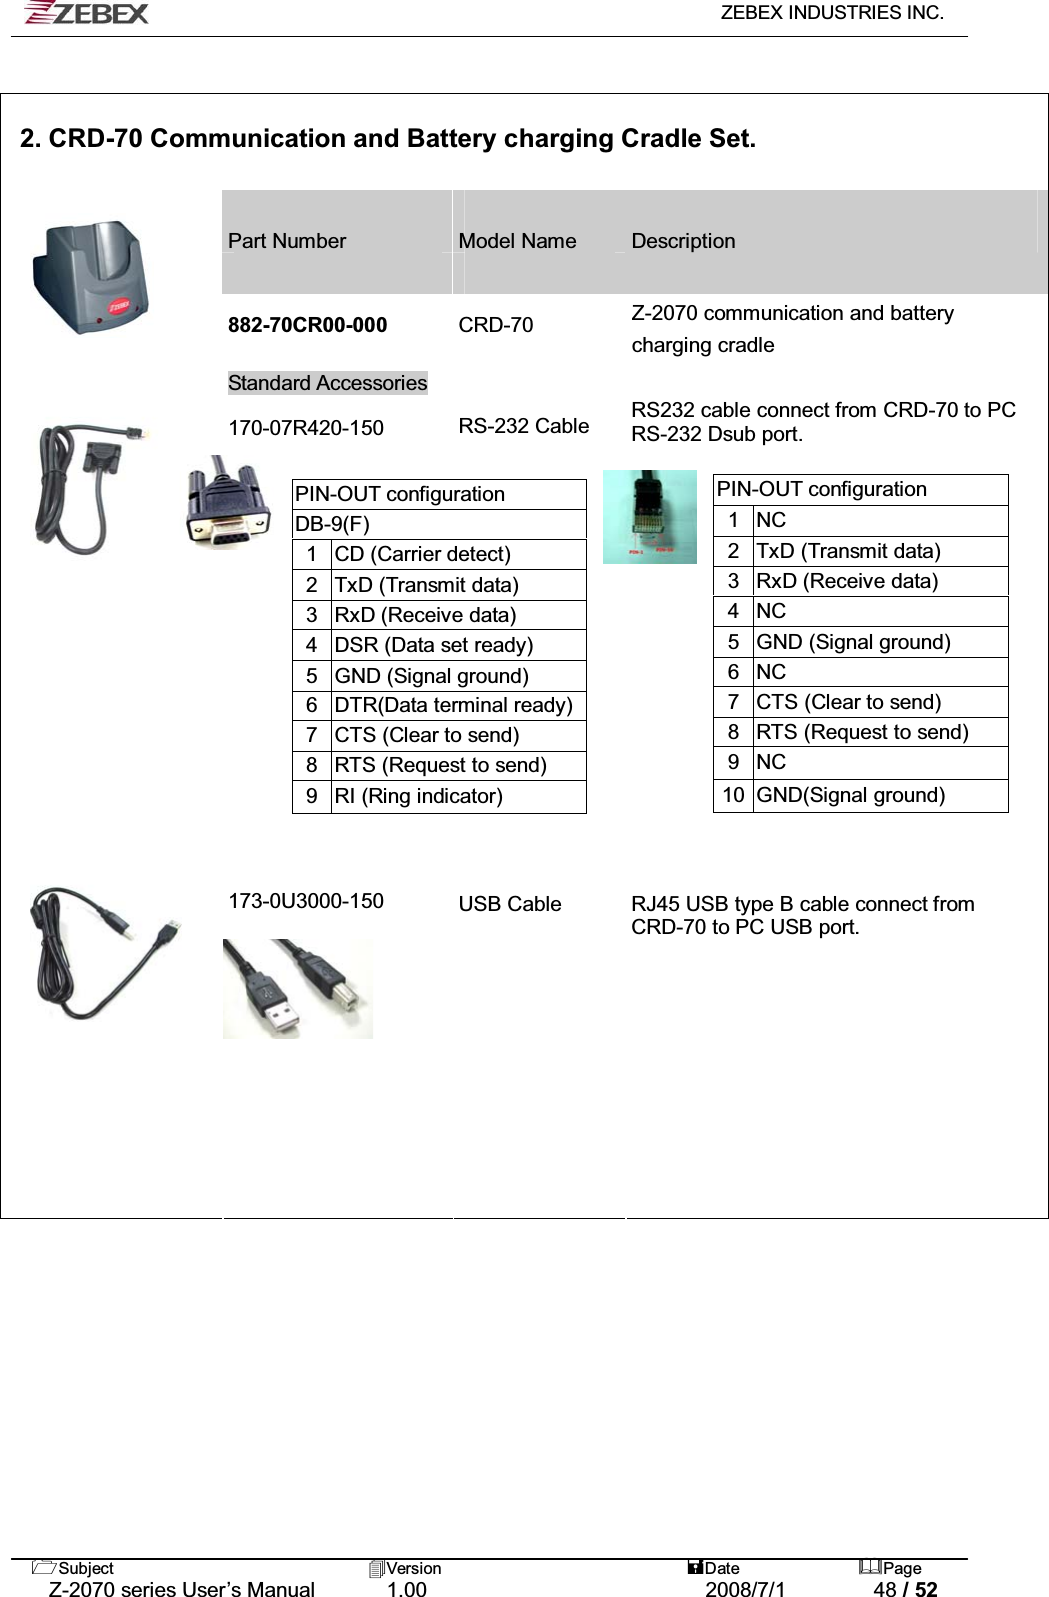   ZEBEX INDUSTRIES INC.   Subject Version  Date Page   Z-2070 series User’s Manual  1.00  2008/7/1  48 / 52   2. CRD-70 Communication and Battery charging Cradle Set.  Part Number  Model Name    Description  882-70CR00-000  CRD-70         Z-2070 communication and battery charging cradle Standard Accessories   170-07R420-150     RS-232 Cable  RS232 cable connect from CRD-70 to PC   RS-232 Dsub port.                      173-0U3000-150  USB Cable  RJ45 USB type B cable connect from CRD-70 to PC USB port.                            PIN-OUT configuration DB-9(F) 1 CD (Carrier detect) 2 TxD (Transmit data) 3 RxD (Receive data) 4 DSR (Data set ready) 5 GND (Signal ground) 6 DTR(Data terminal ready) 7 CTS (Clear to send) 8 RTS (Request to send) 9 RI (Ring indicator) PIN-OUT configuration 1 NC 2 TxD (Transmit data) 3 RxD (Receive data) 4 NC 5 GND (Signal ground) 6 NC 7 CTS (Clear to send) 8 RTS (Request to send) 9 NC 10 GND(Signal ground) 